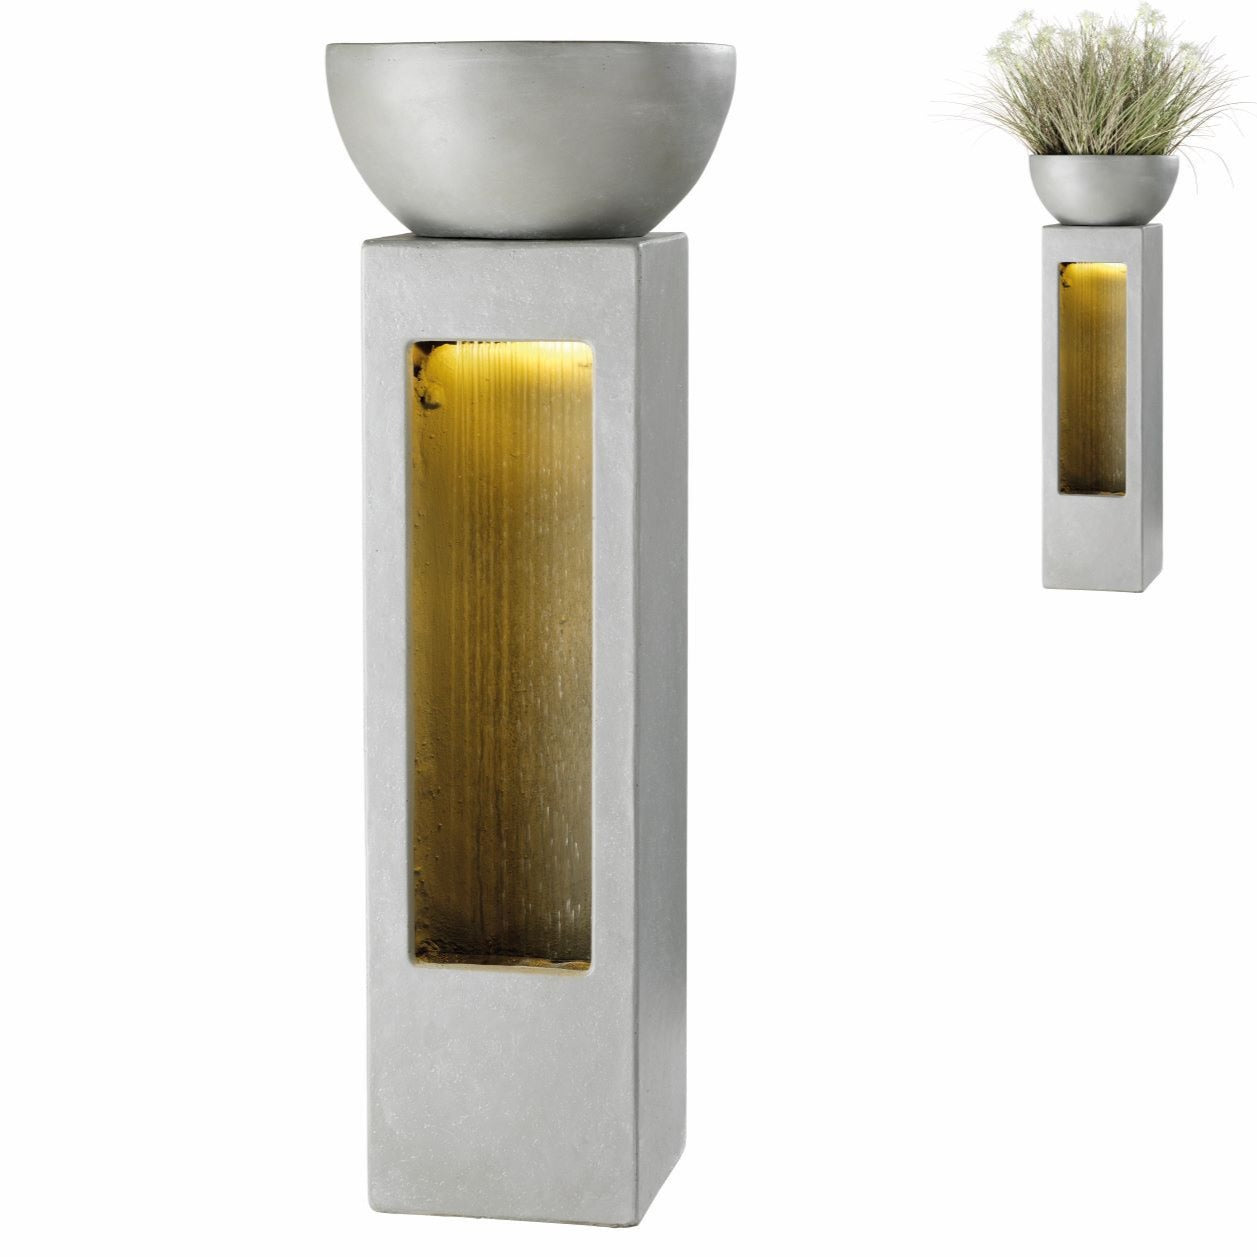 Artemis Cascading Water Feature Column with Planter - No Plumbing Required